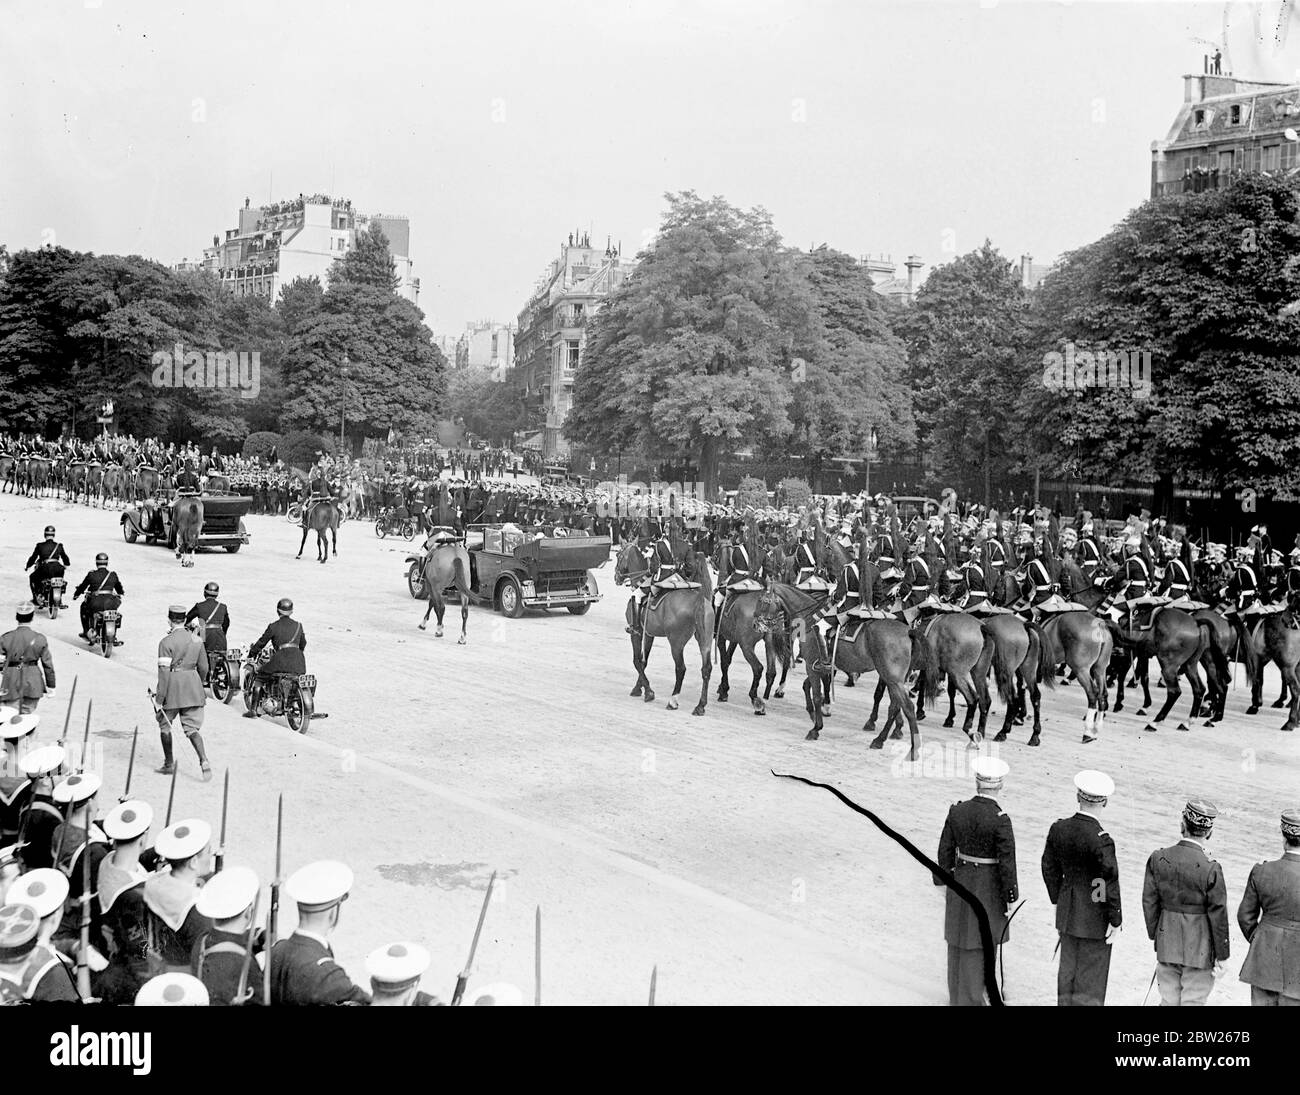 King and Queen receive tumultuous welcome in Paris. Welcomed by 1 million cheering people and the thunder of 101 gun salute, the King and Queen arrived at the Gare Bois de Boulogne on their State visit to Paris. Accompanied by President Lebrun of France and Mme Lebrun , they made the 4 mile drive through decorated streets lined with troops and crowds to the Qui d' Orsay Palace , where they are staying. Photo shows, the Queen and Mme Lebrun , driving from Bois de Boulogne Station to the Quai d'Orsay. 19 July 1938 Stock Photo